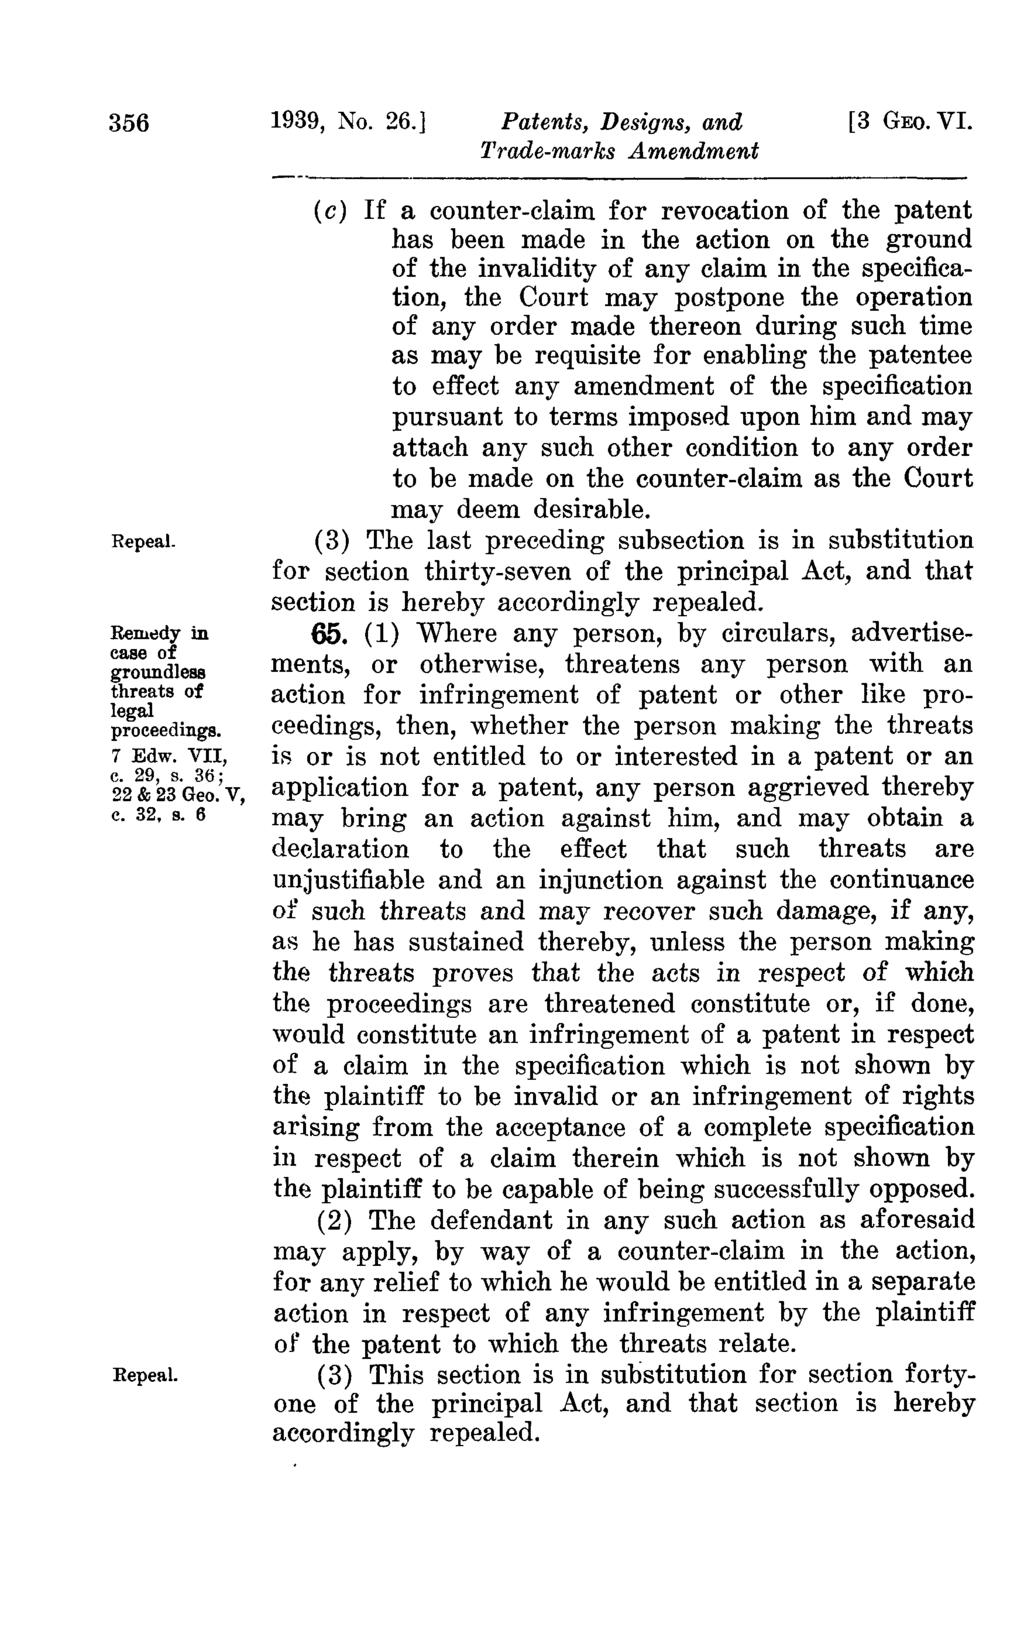 356 1939, No. 26.] Patents, Designs, and [3 GEO. VI. RepeaL Rellitldy in case of groundlebb threats of legal proceedings. 7 Edw. VII, c. 29, s. 36; 22 & 23 Geo. V, c. 32, s. 6 Repeal.